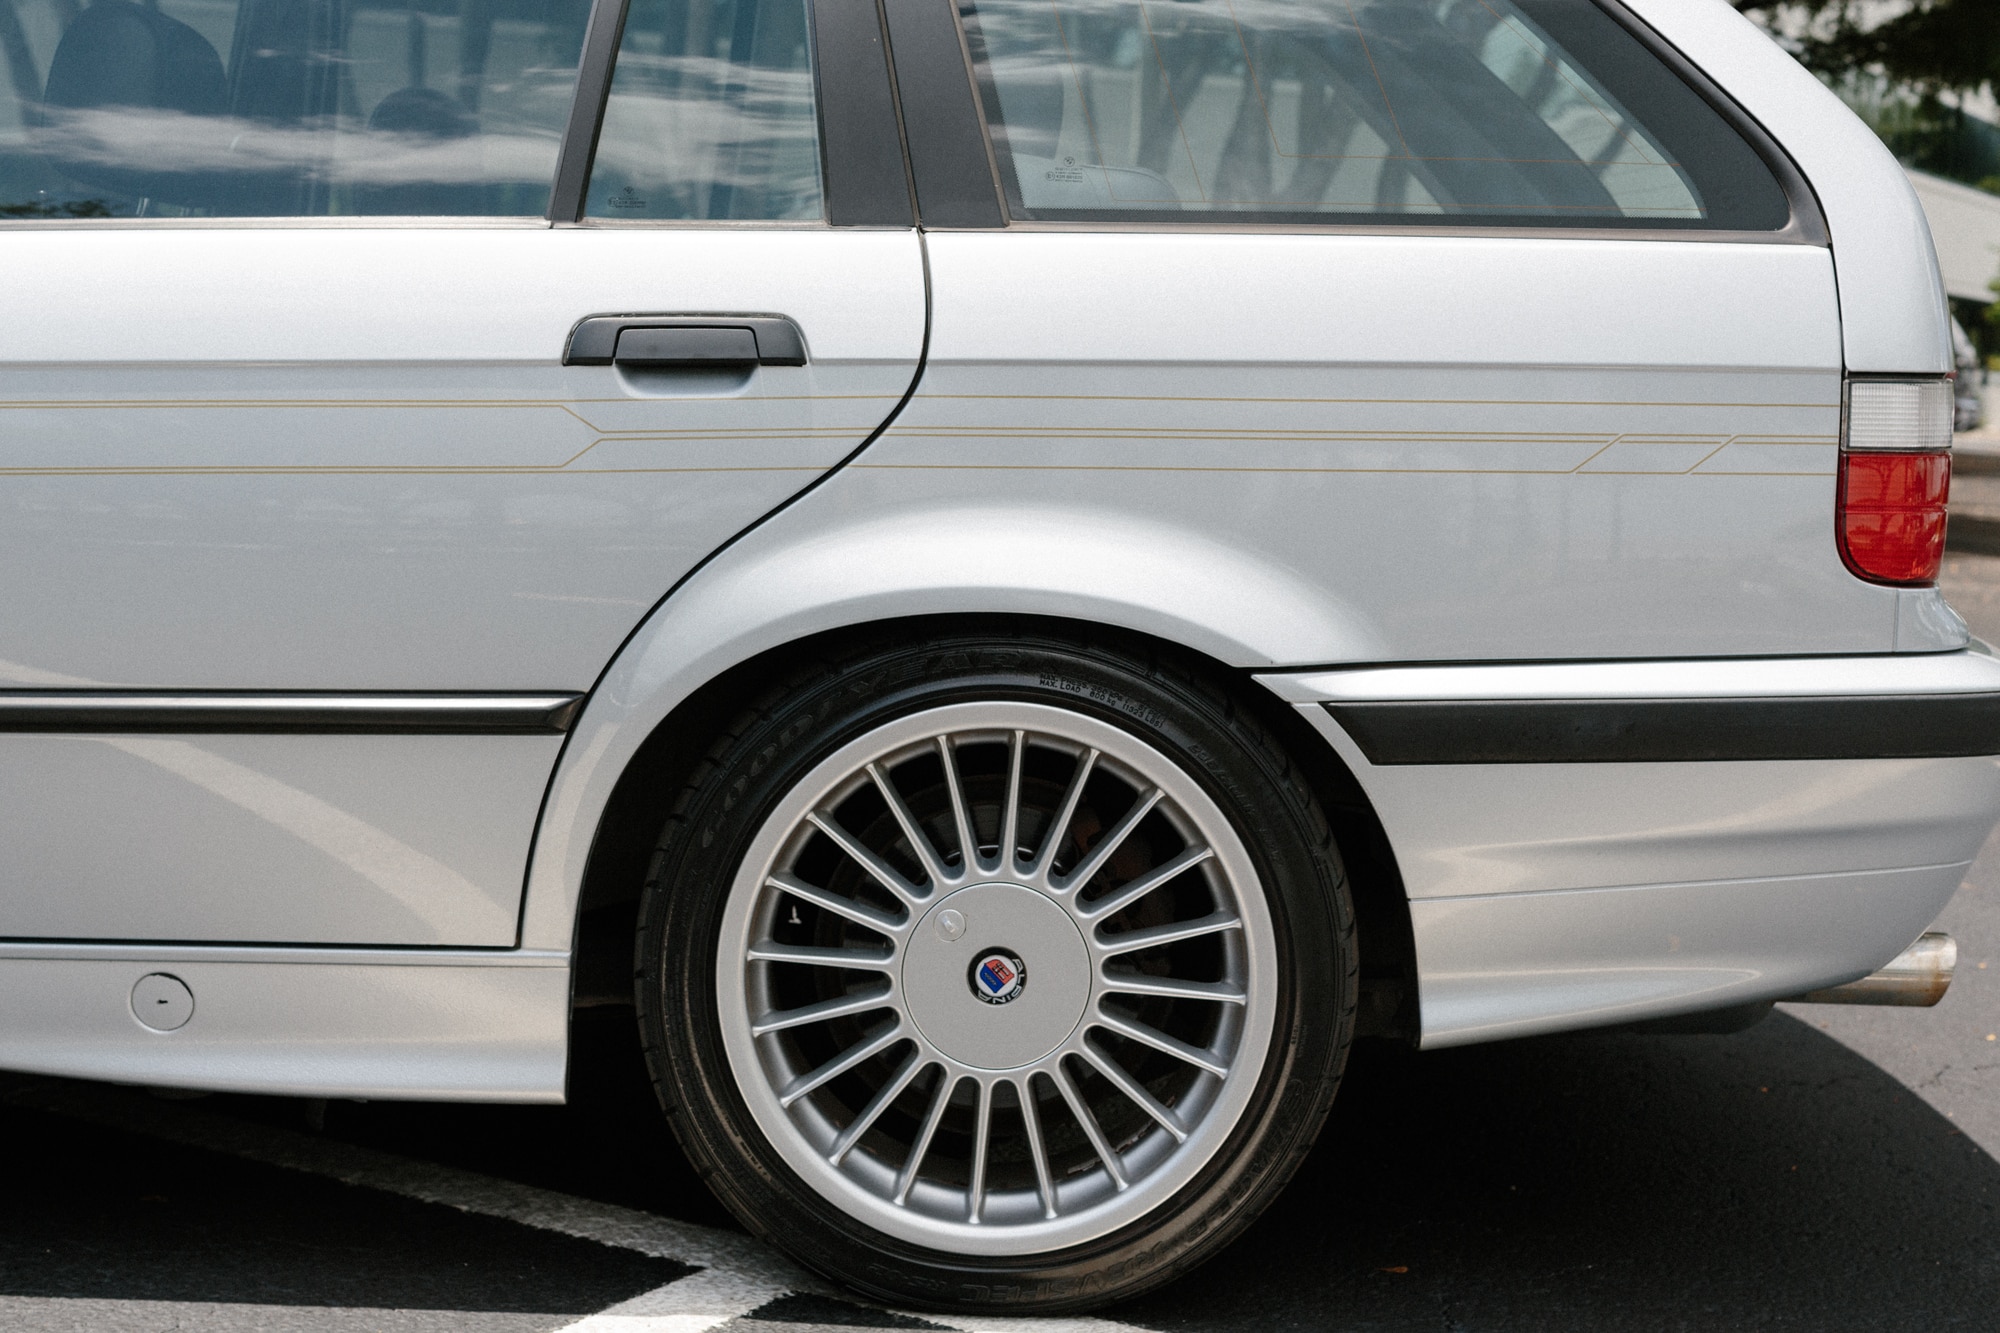 1998 BMW Alpina B6 2.8 Touring (E36) | #111 of 136 units | Arctic Silver-Gold Dekor | Japan Only Model | Great Condition | Drives Well | Extremely Rare & Unique